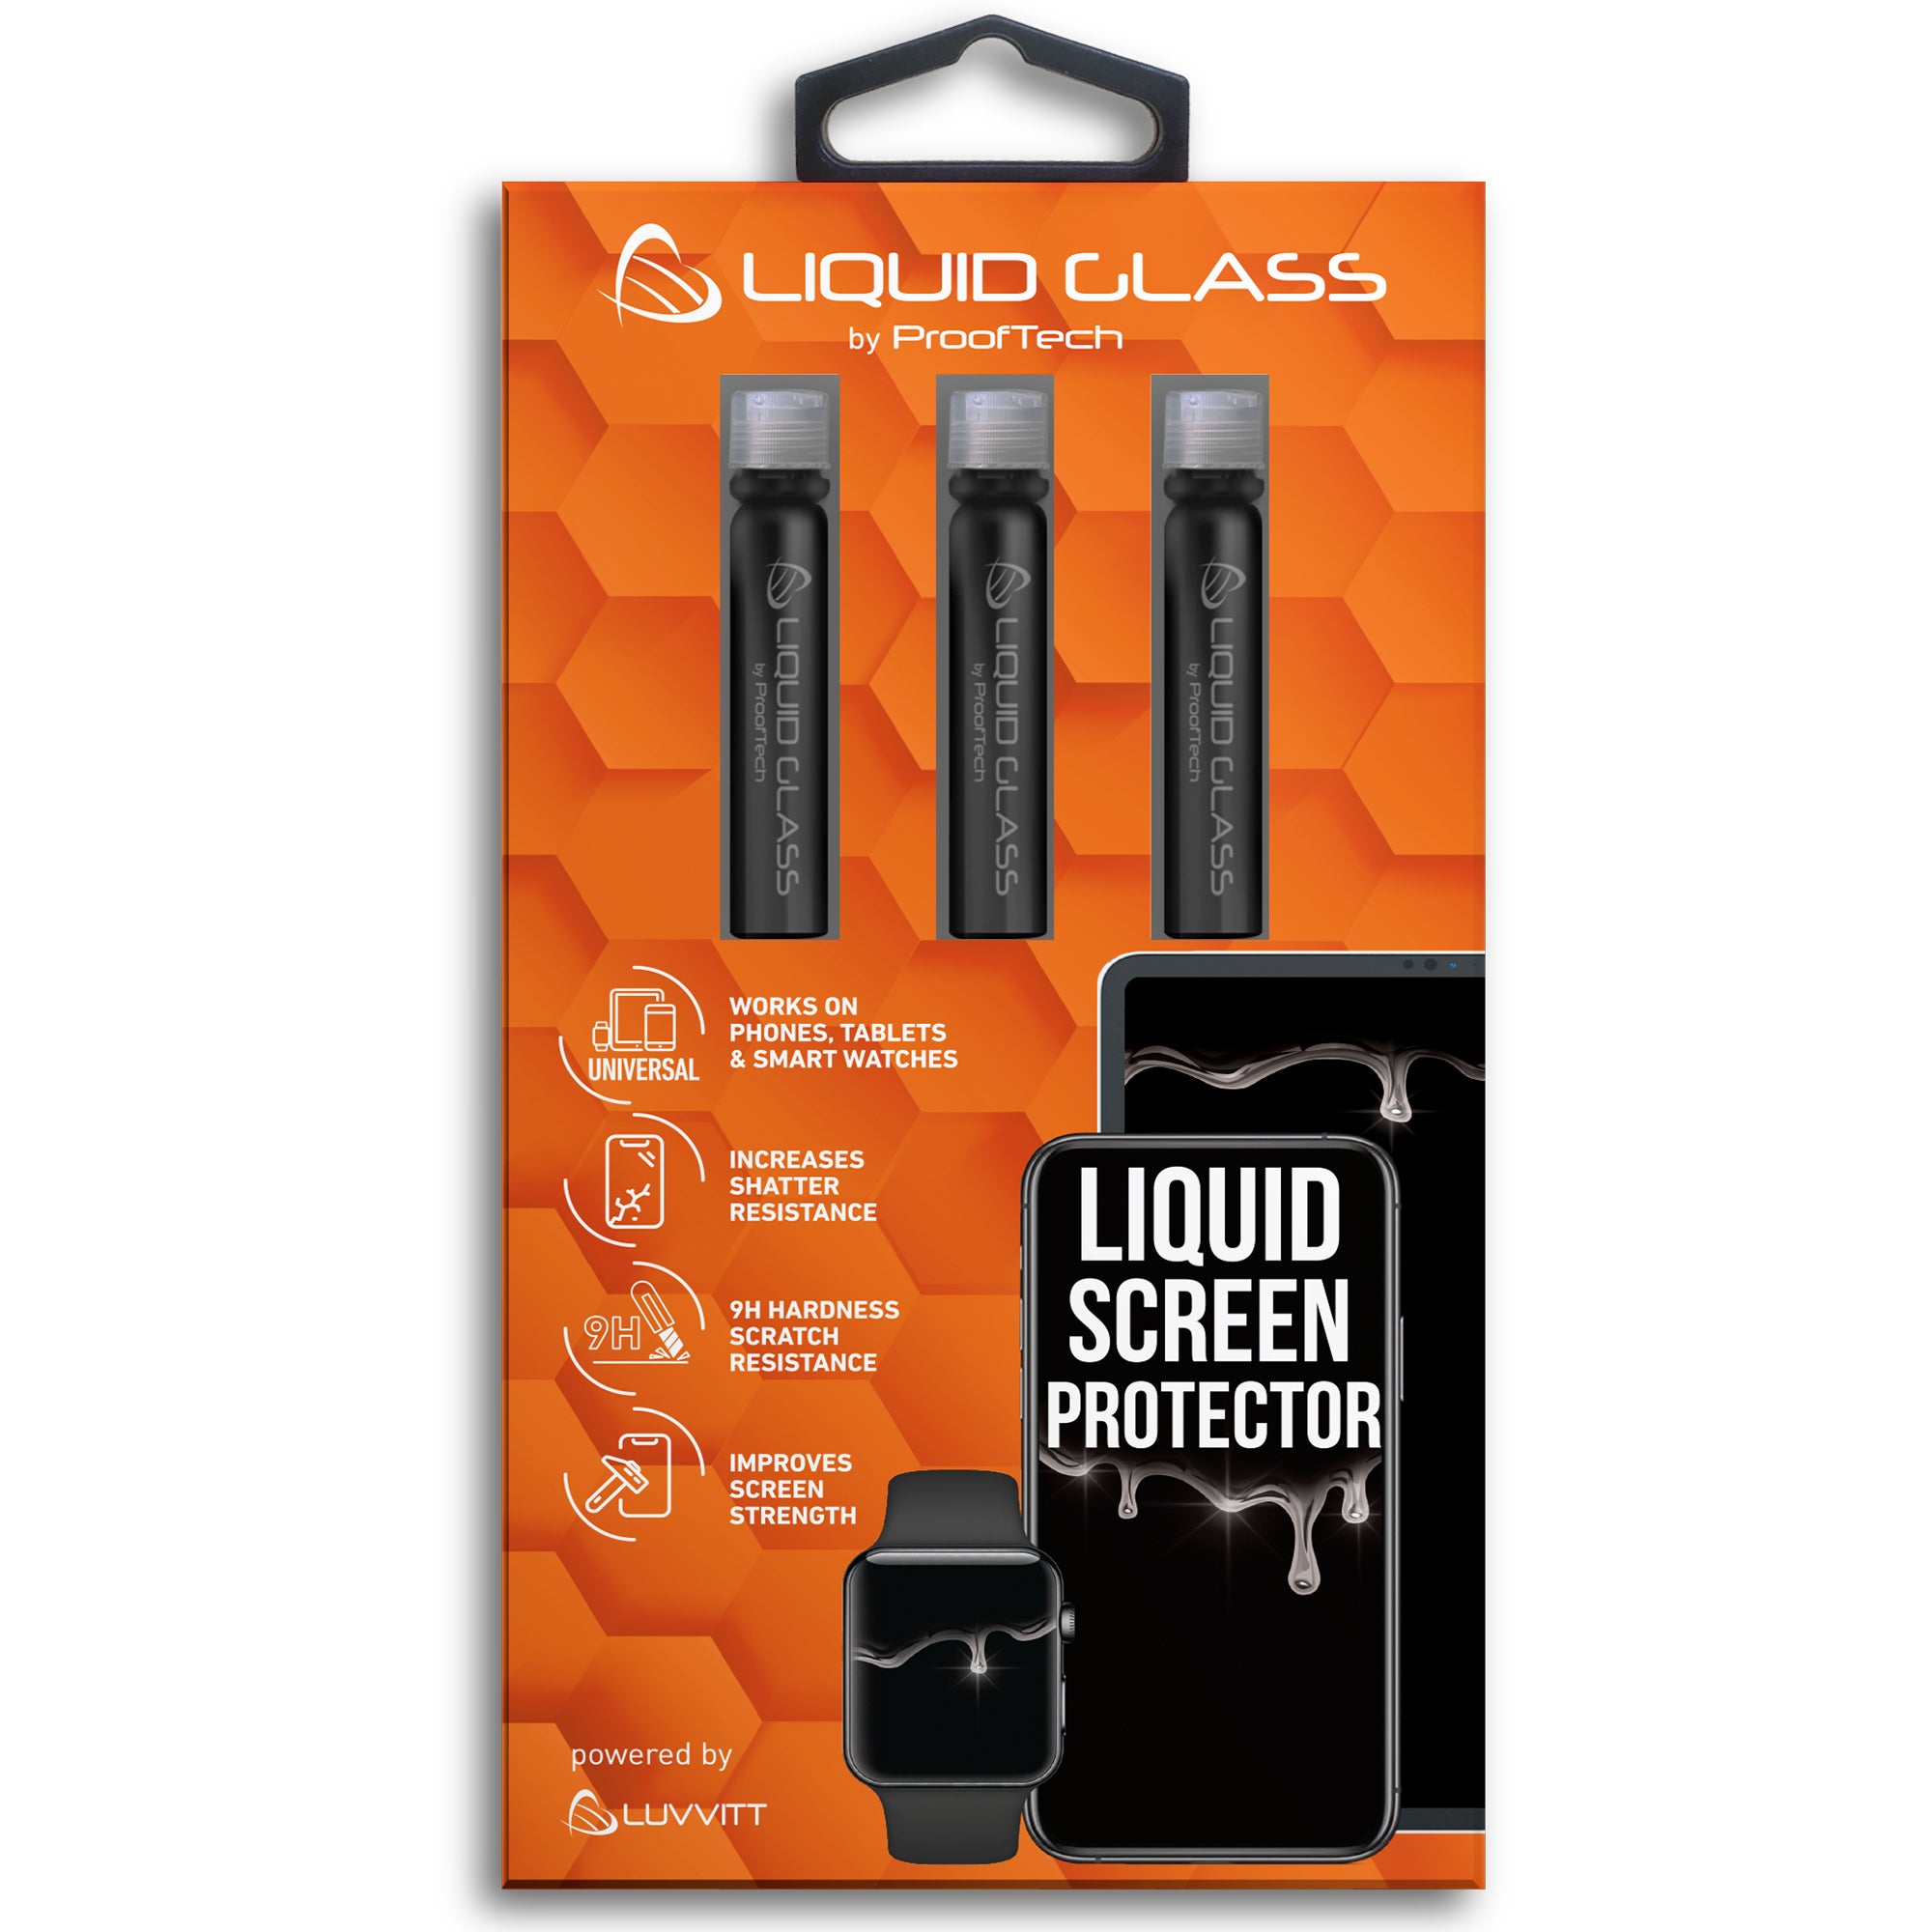 Liquid Glass Screen Protector Universal for All Phones Tablets Watches -3Pk